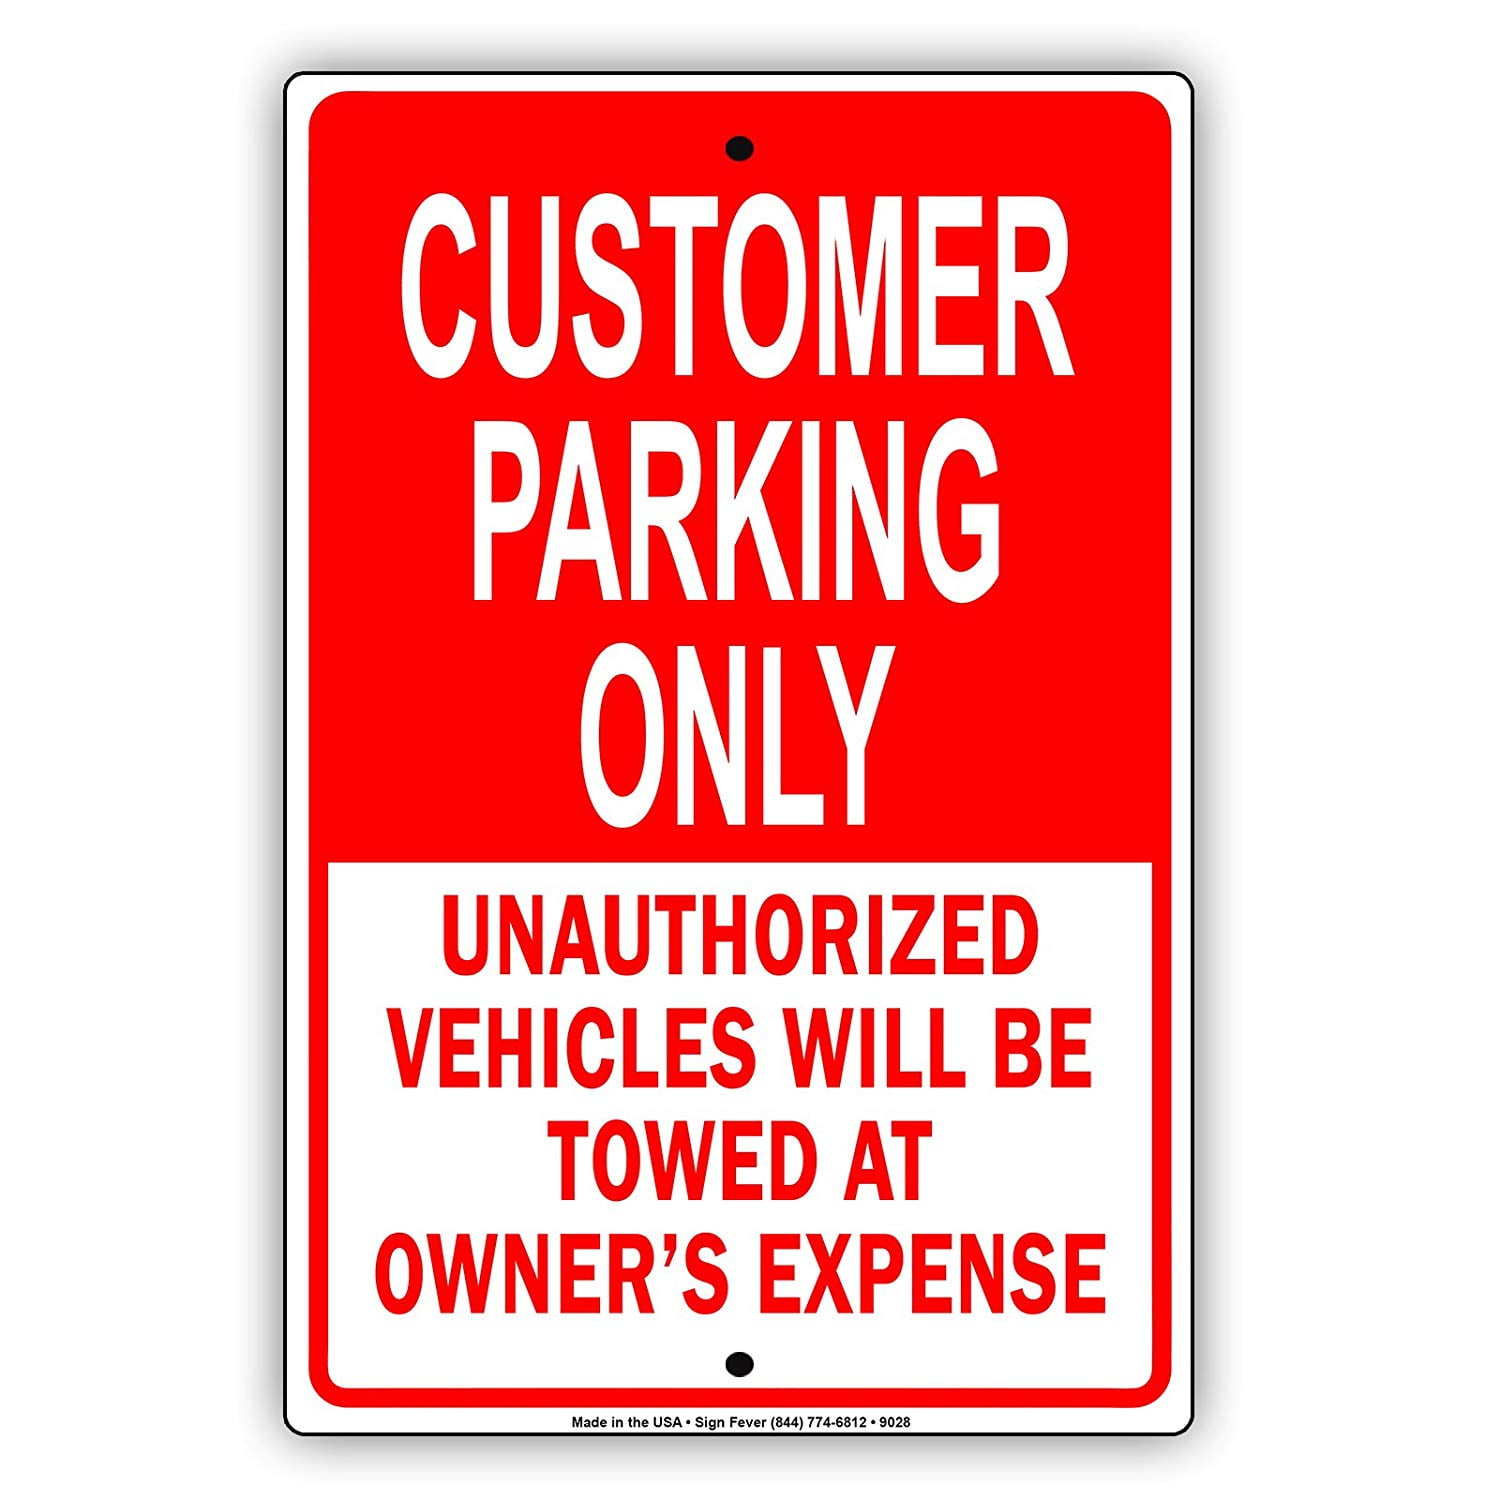 CUSTOMER PARKING 18x24 Inch Sign With Display Options 